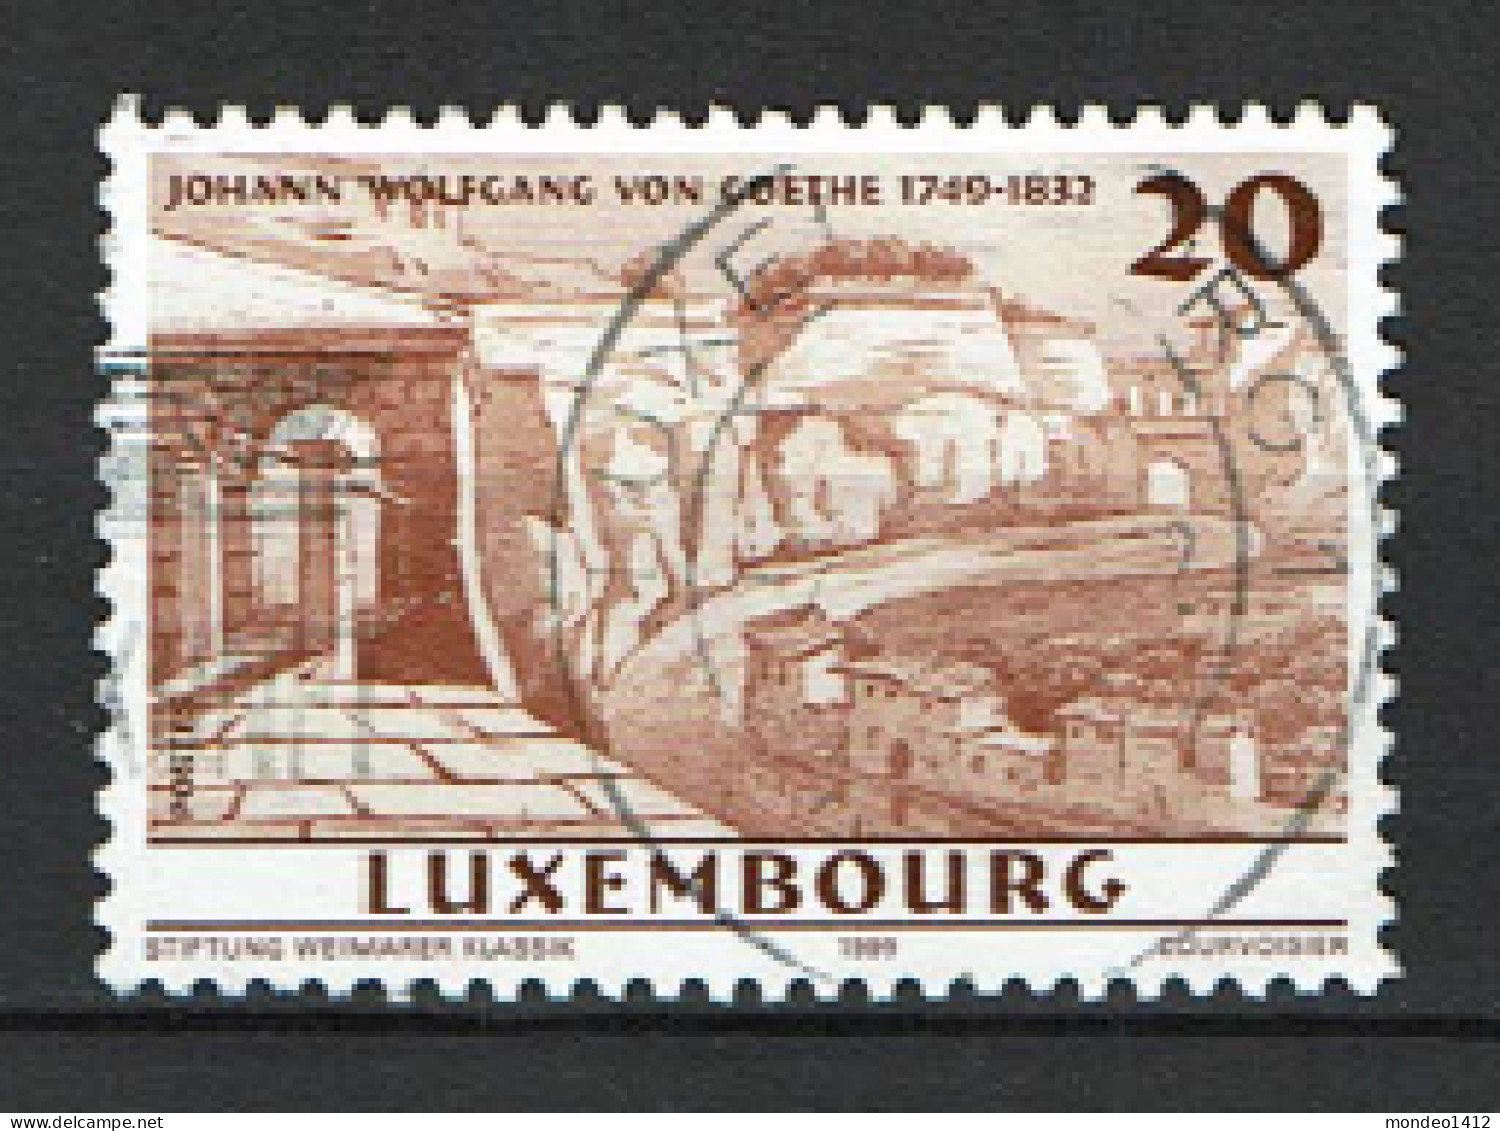 Luxembourg 1999 - YT 1439 - Anniversary Of The Birth Of Johann Wolfgang Von Goethe, Ecrivain - Oblitérés